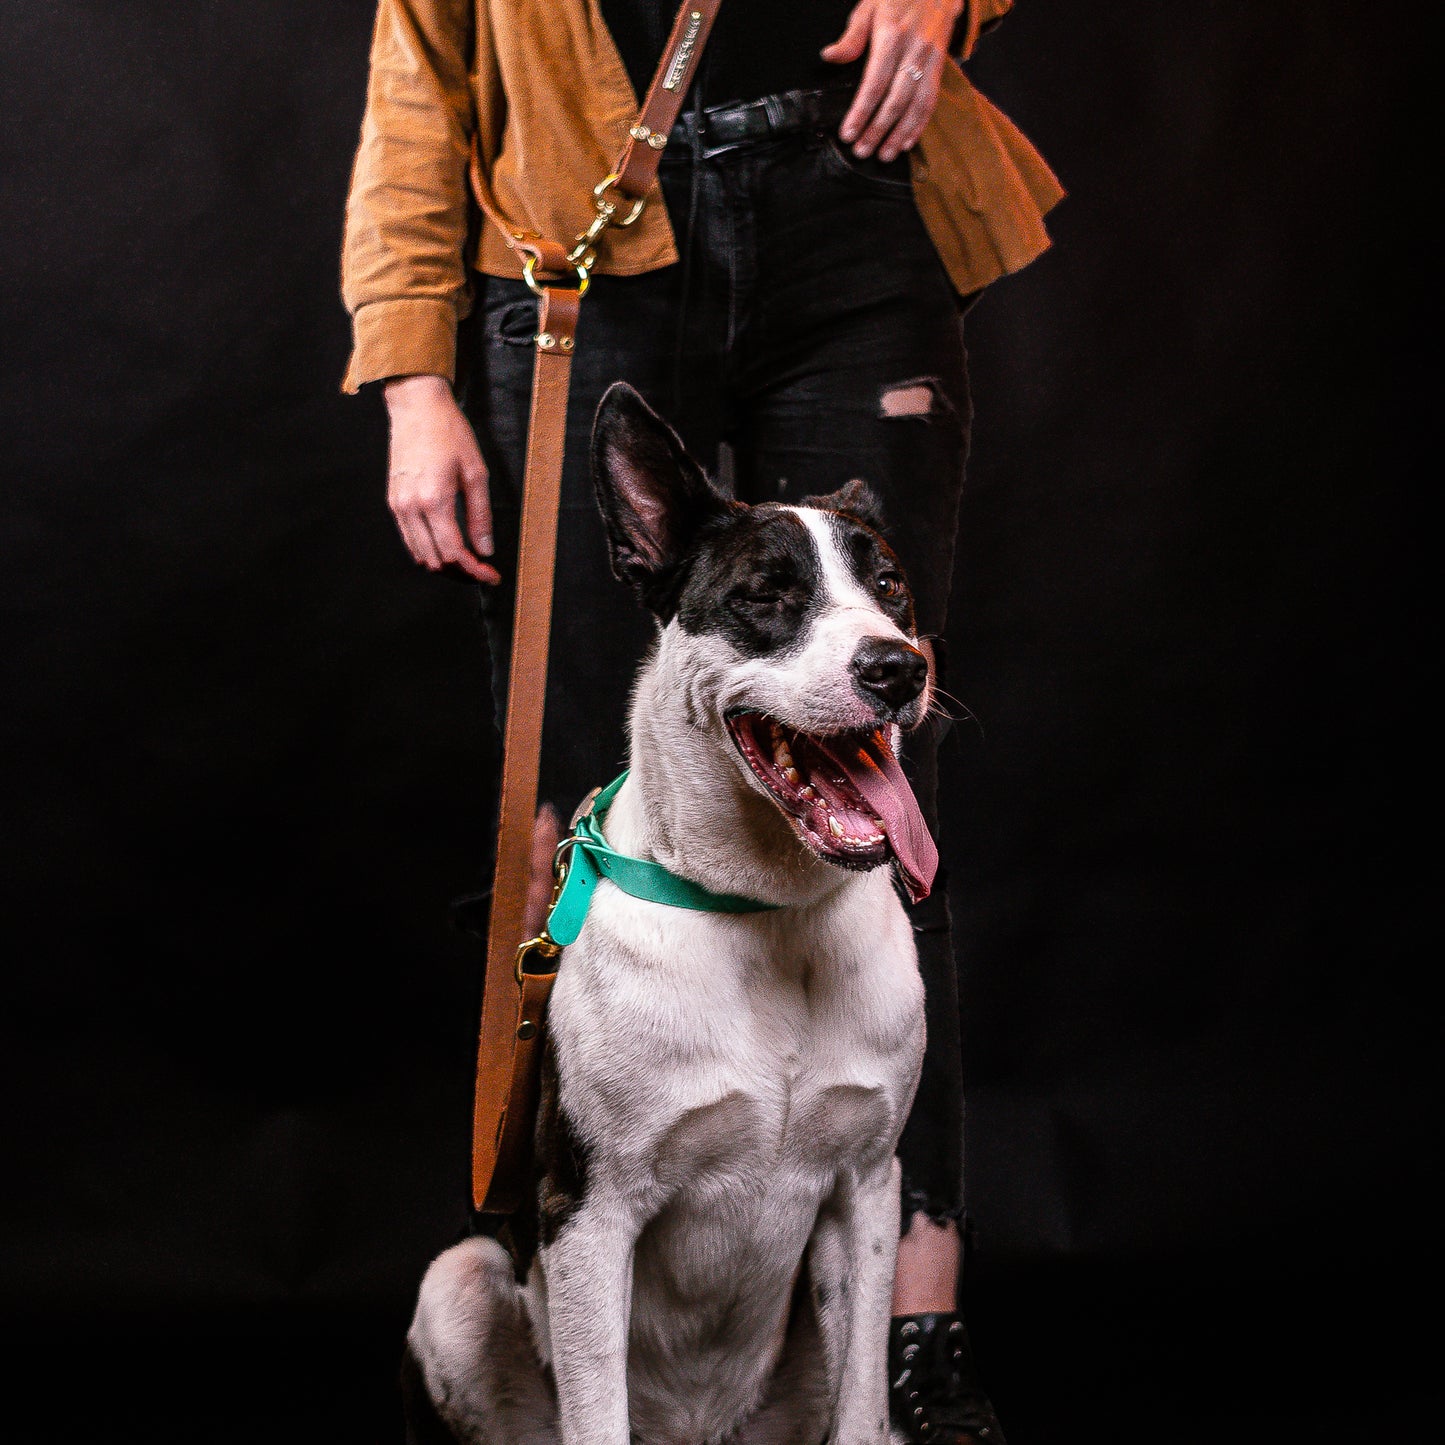 Female model in black jeans and brown jacket with a large sized dog next to her. She is wearing a hands free leash holding the dog.